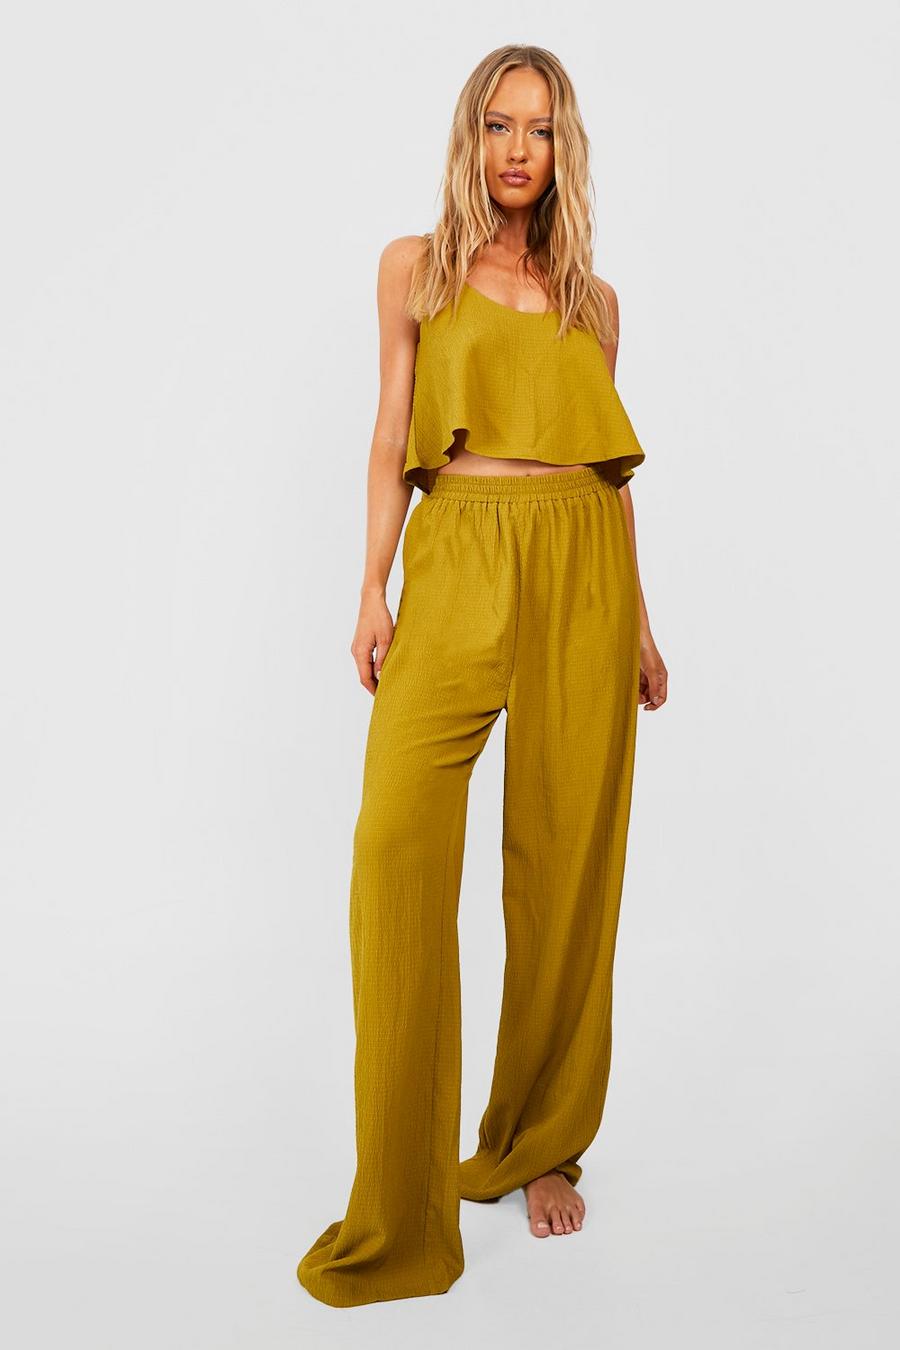 Olive Tall Textured Swing Crop And Wide Leg Pants Set